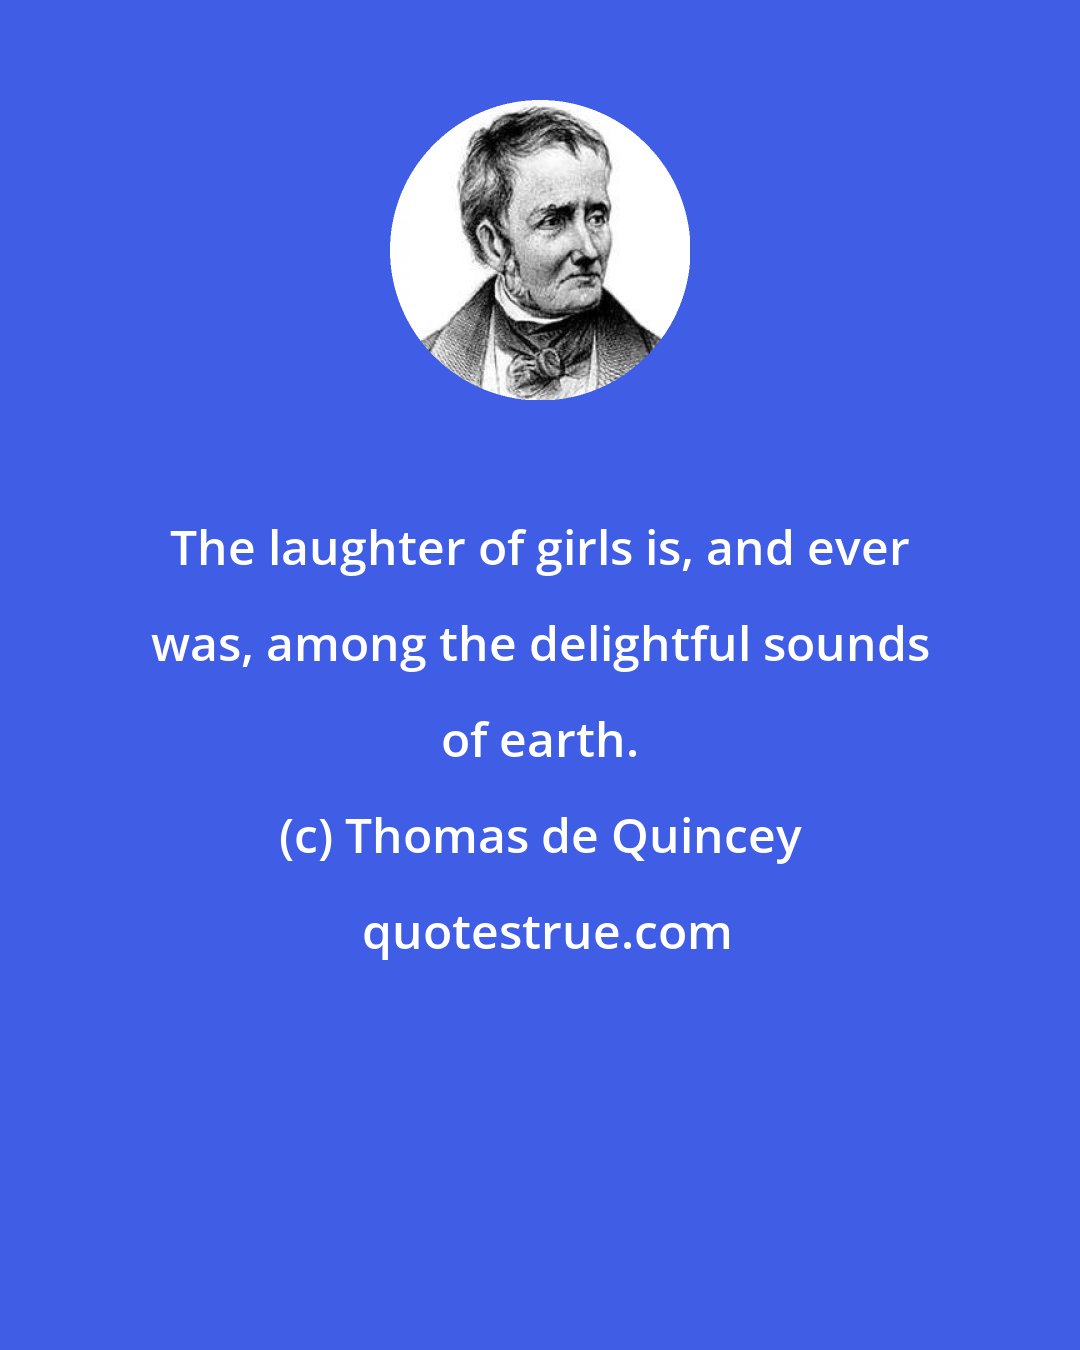 Thomas de Quincey: The laughter of girls is, and ever was, among the delightful sounds of earth.